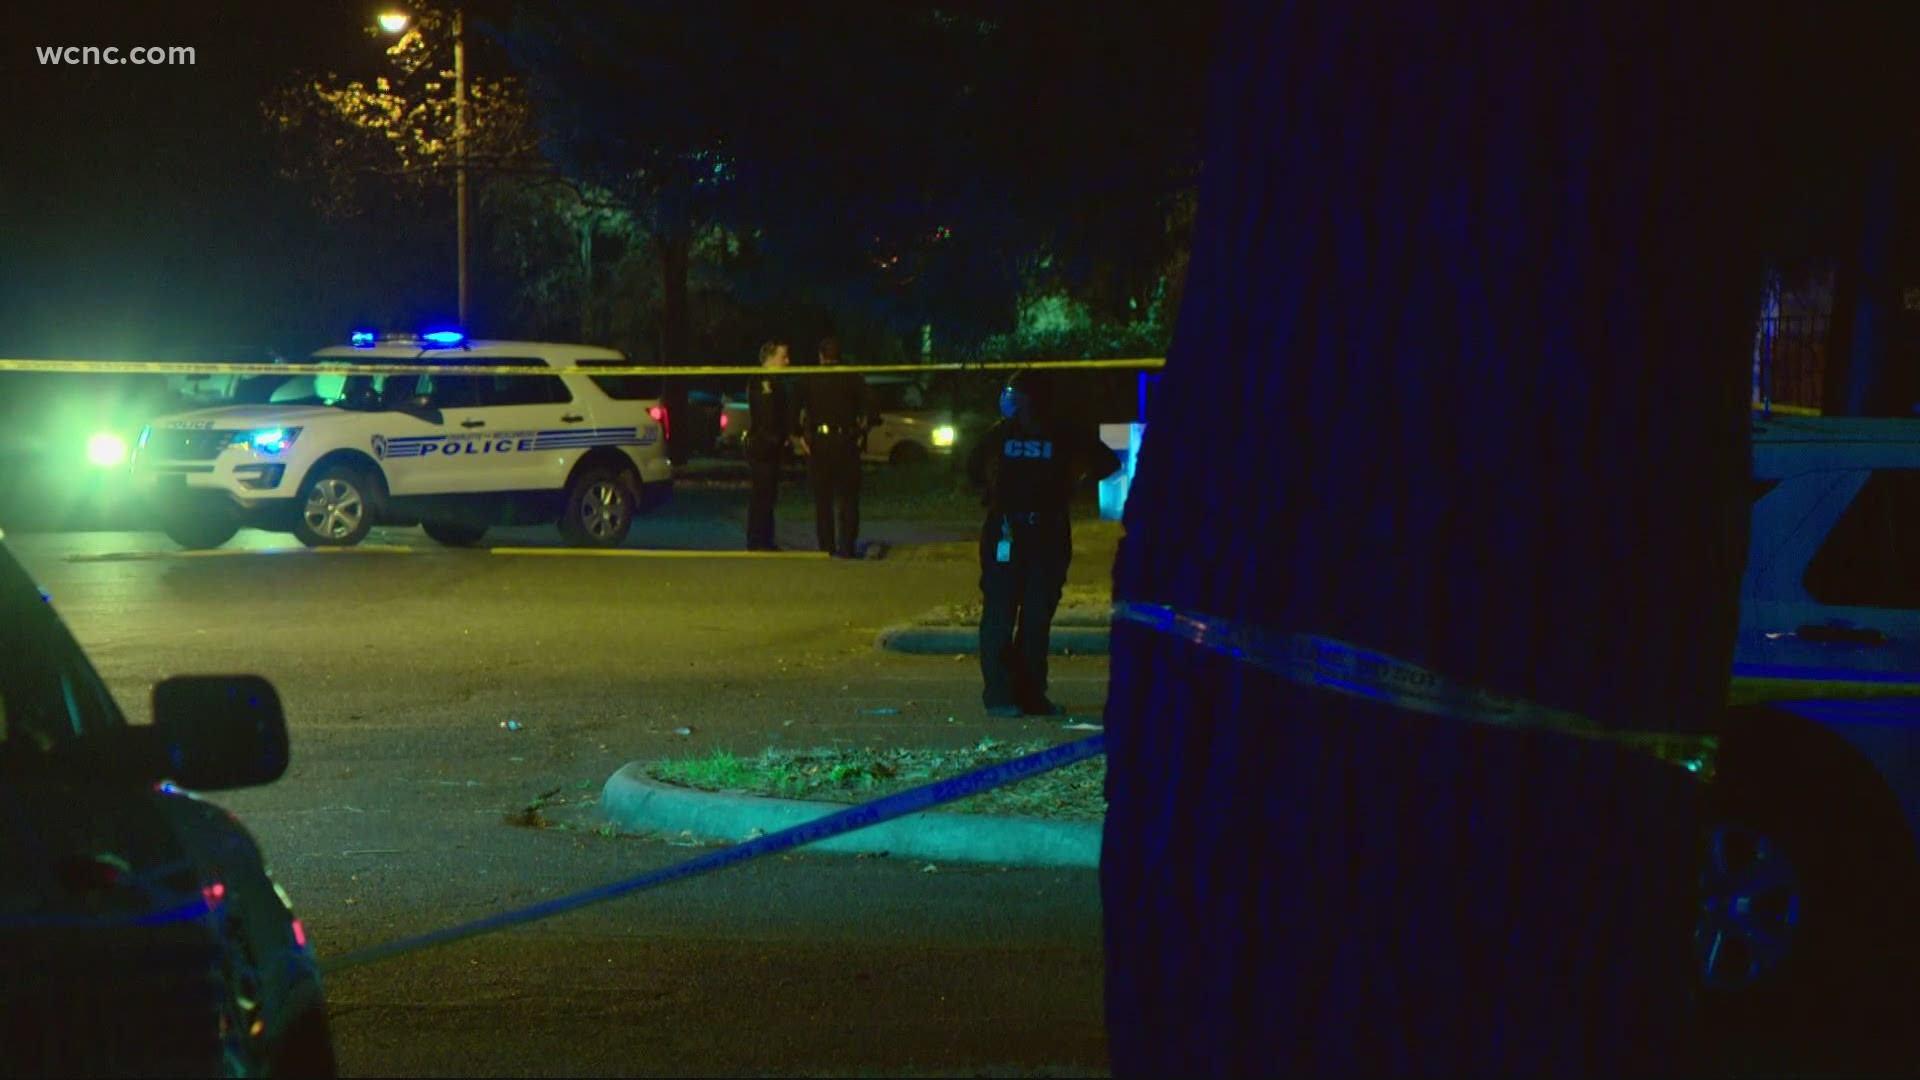 Police said one person died in a south Charlotte shooting Saturday.